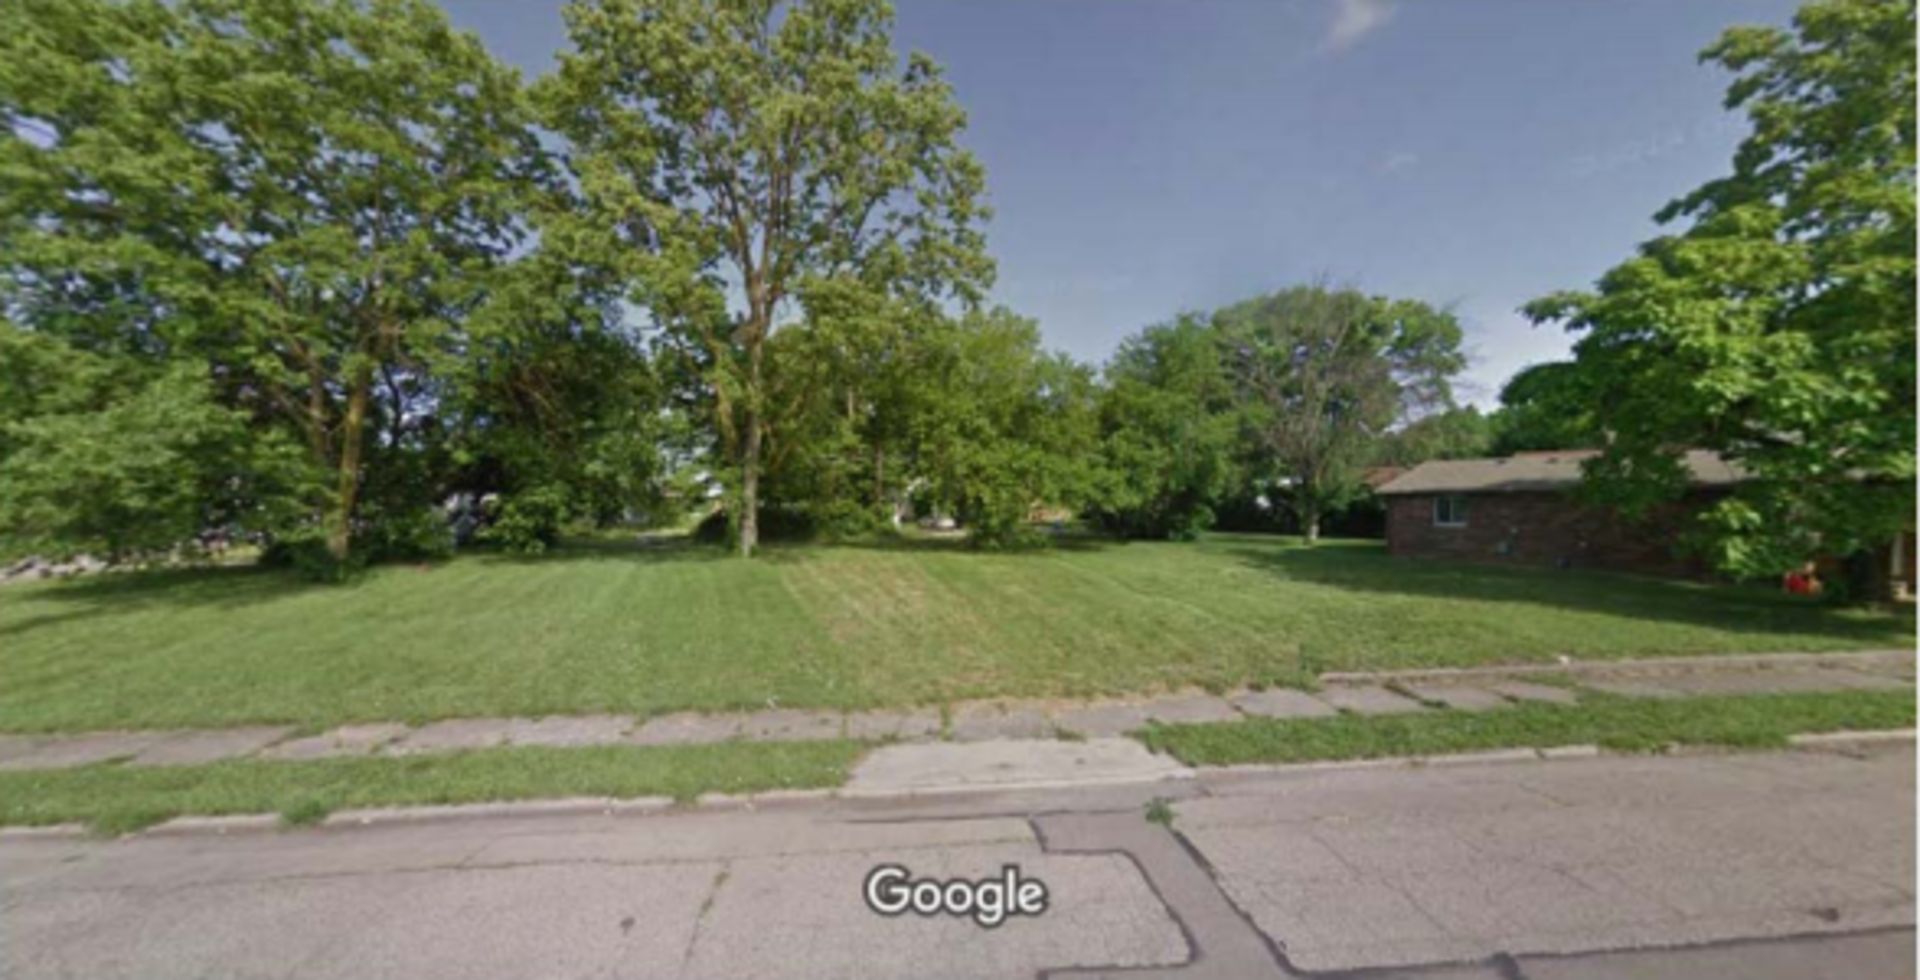 1120 Garfield St, Middletown OH 45044 Butler County   Parcel # Q6542030000196 40x105 (4200 Sq. - Image 5 of 6